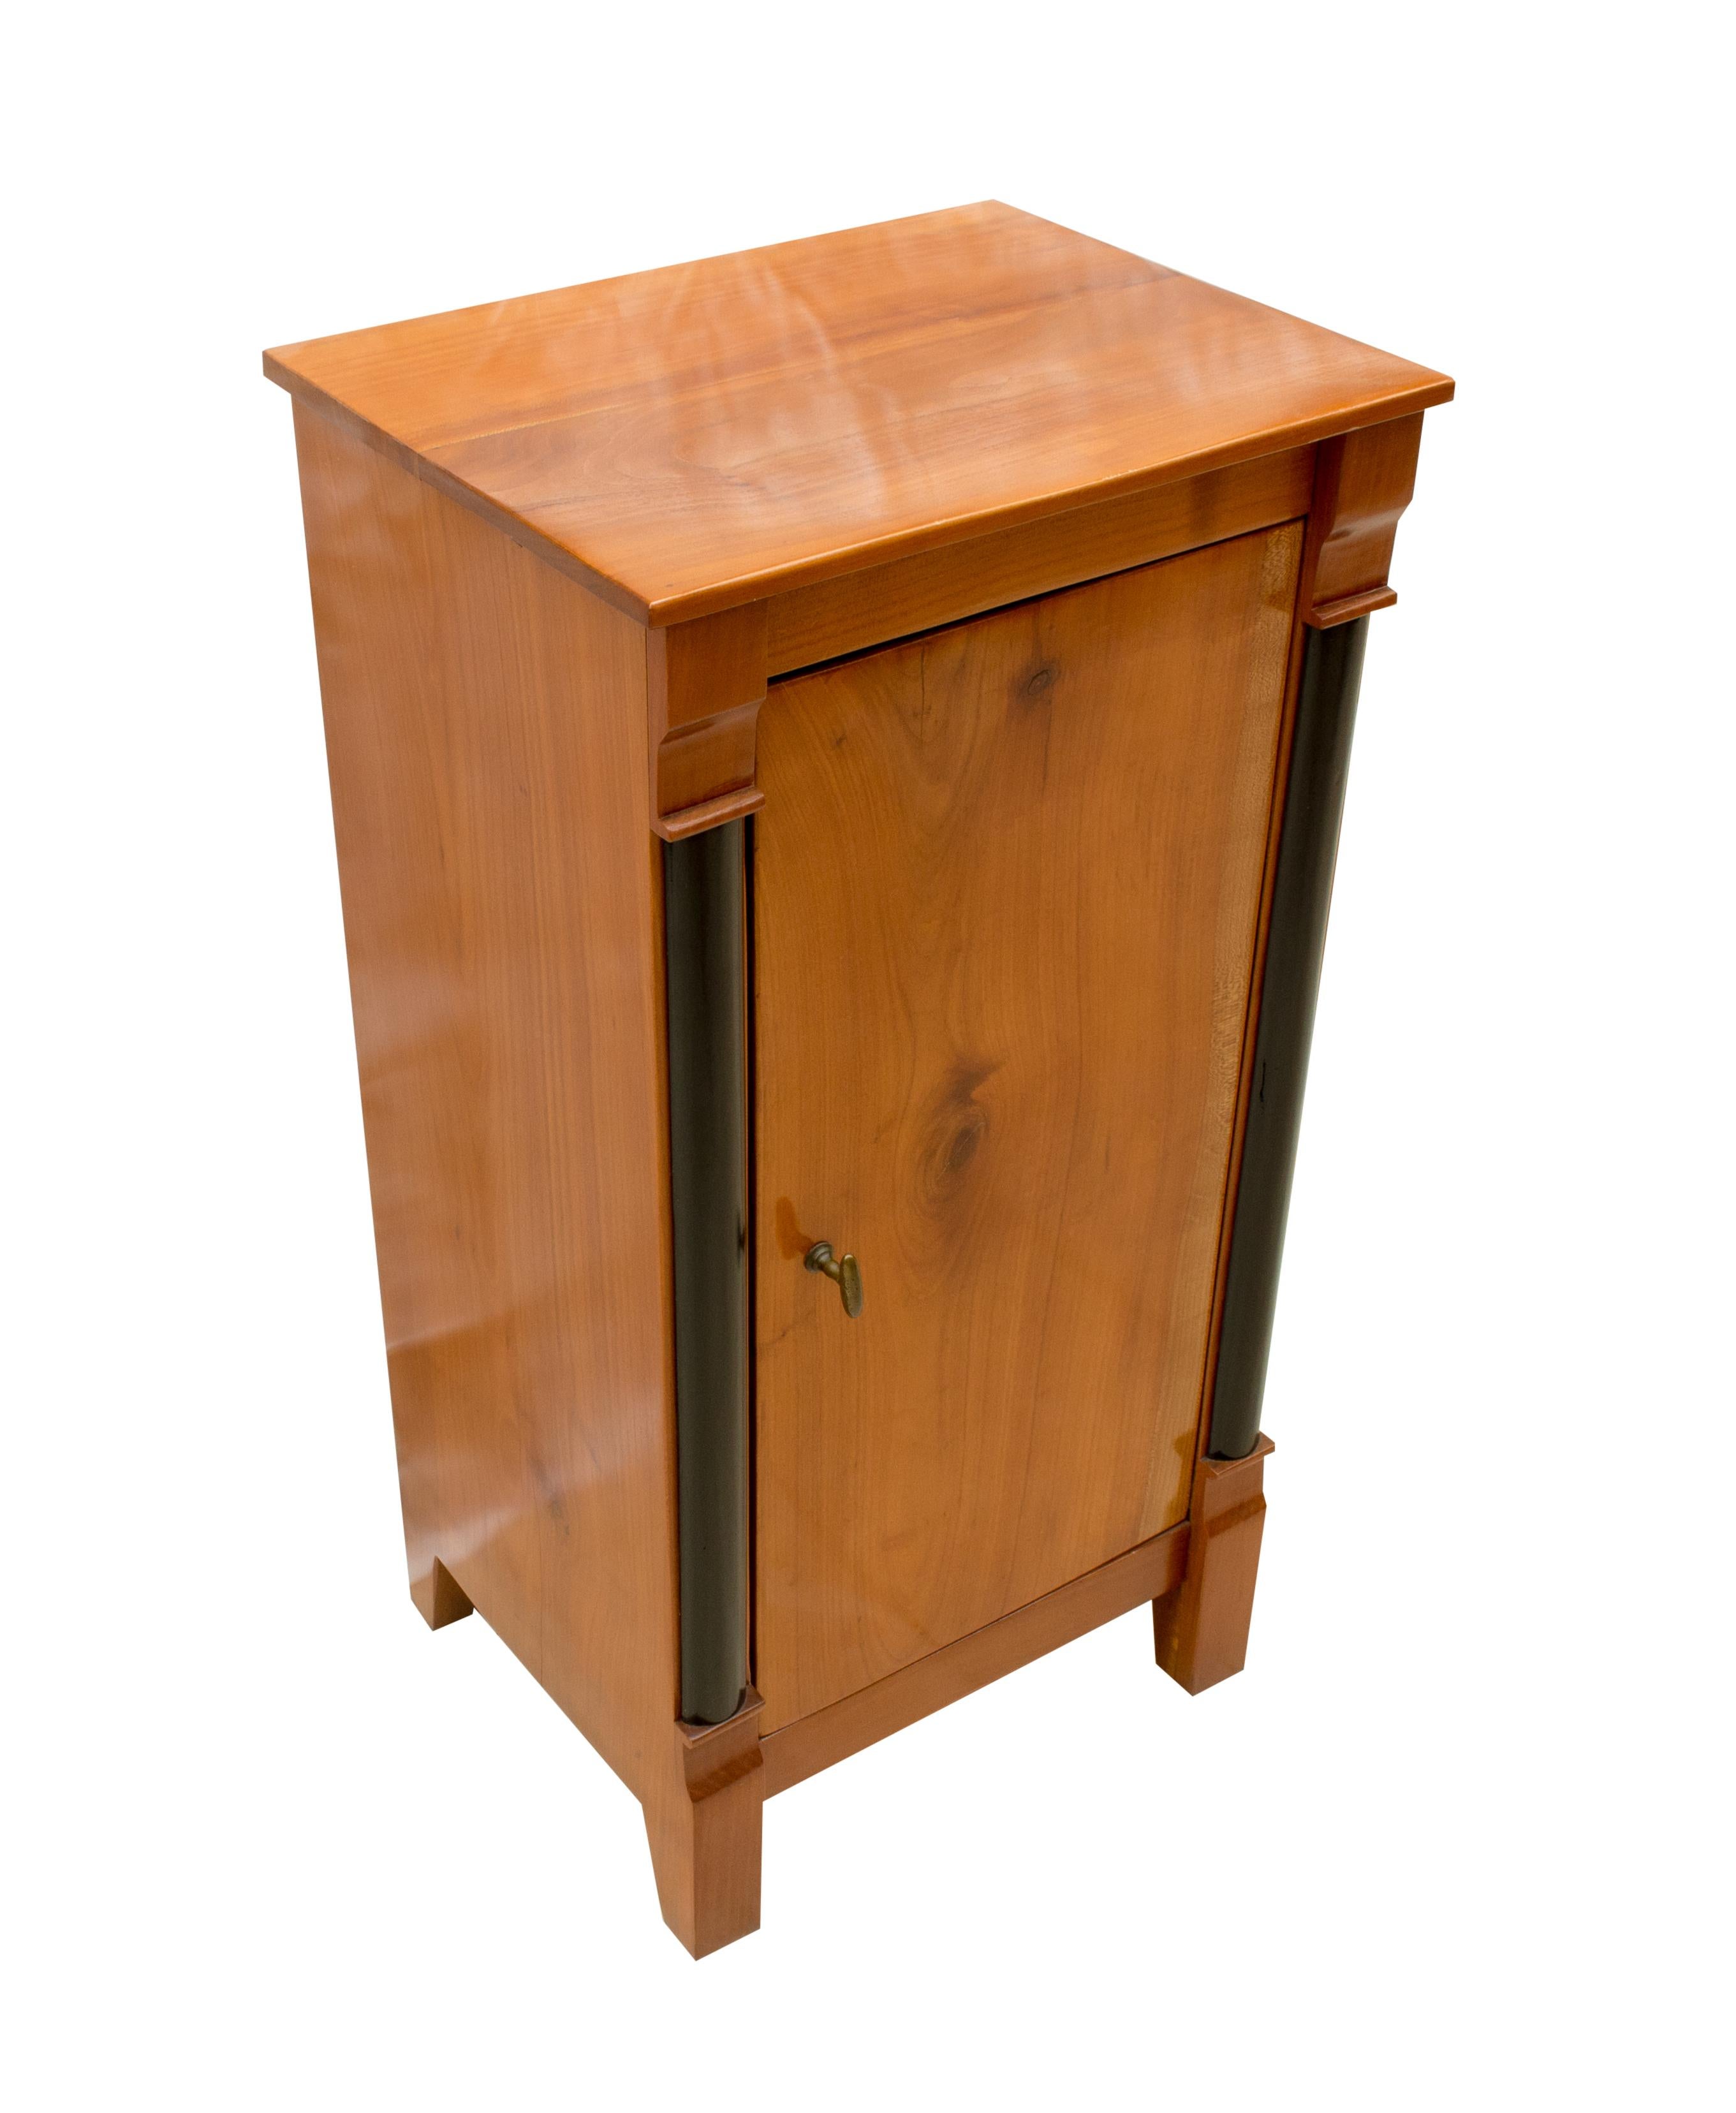 Original Biedermeier solid cherrywood nightstand or pillar cabinet from Germany. Back and shelf is made of pinewood as usual. The opening handle is made of brass. The furniture is in a very good, restored condition.